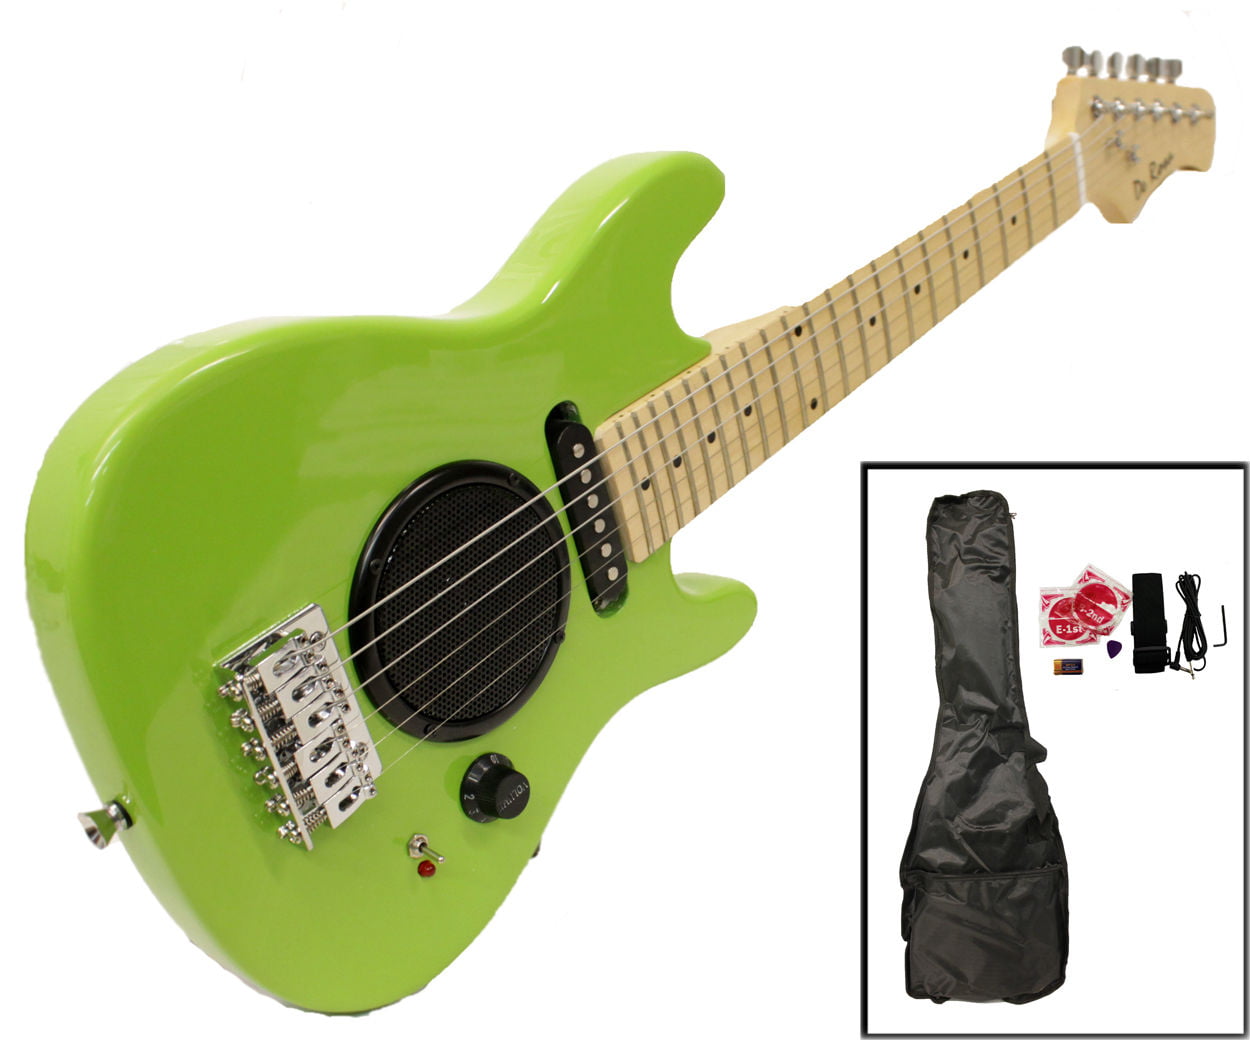 Includes Case & Acc Kit Childs Toy 30 Electric Guitar w/ Built-in Amp Green 